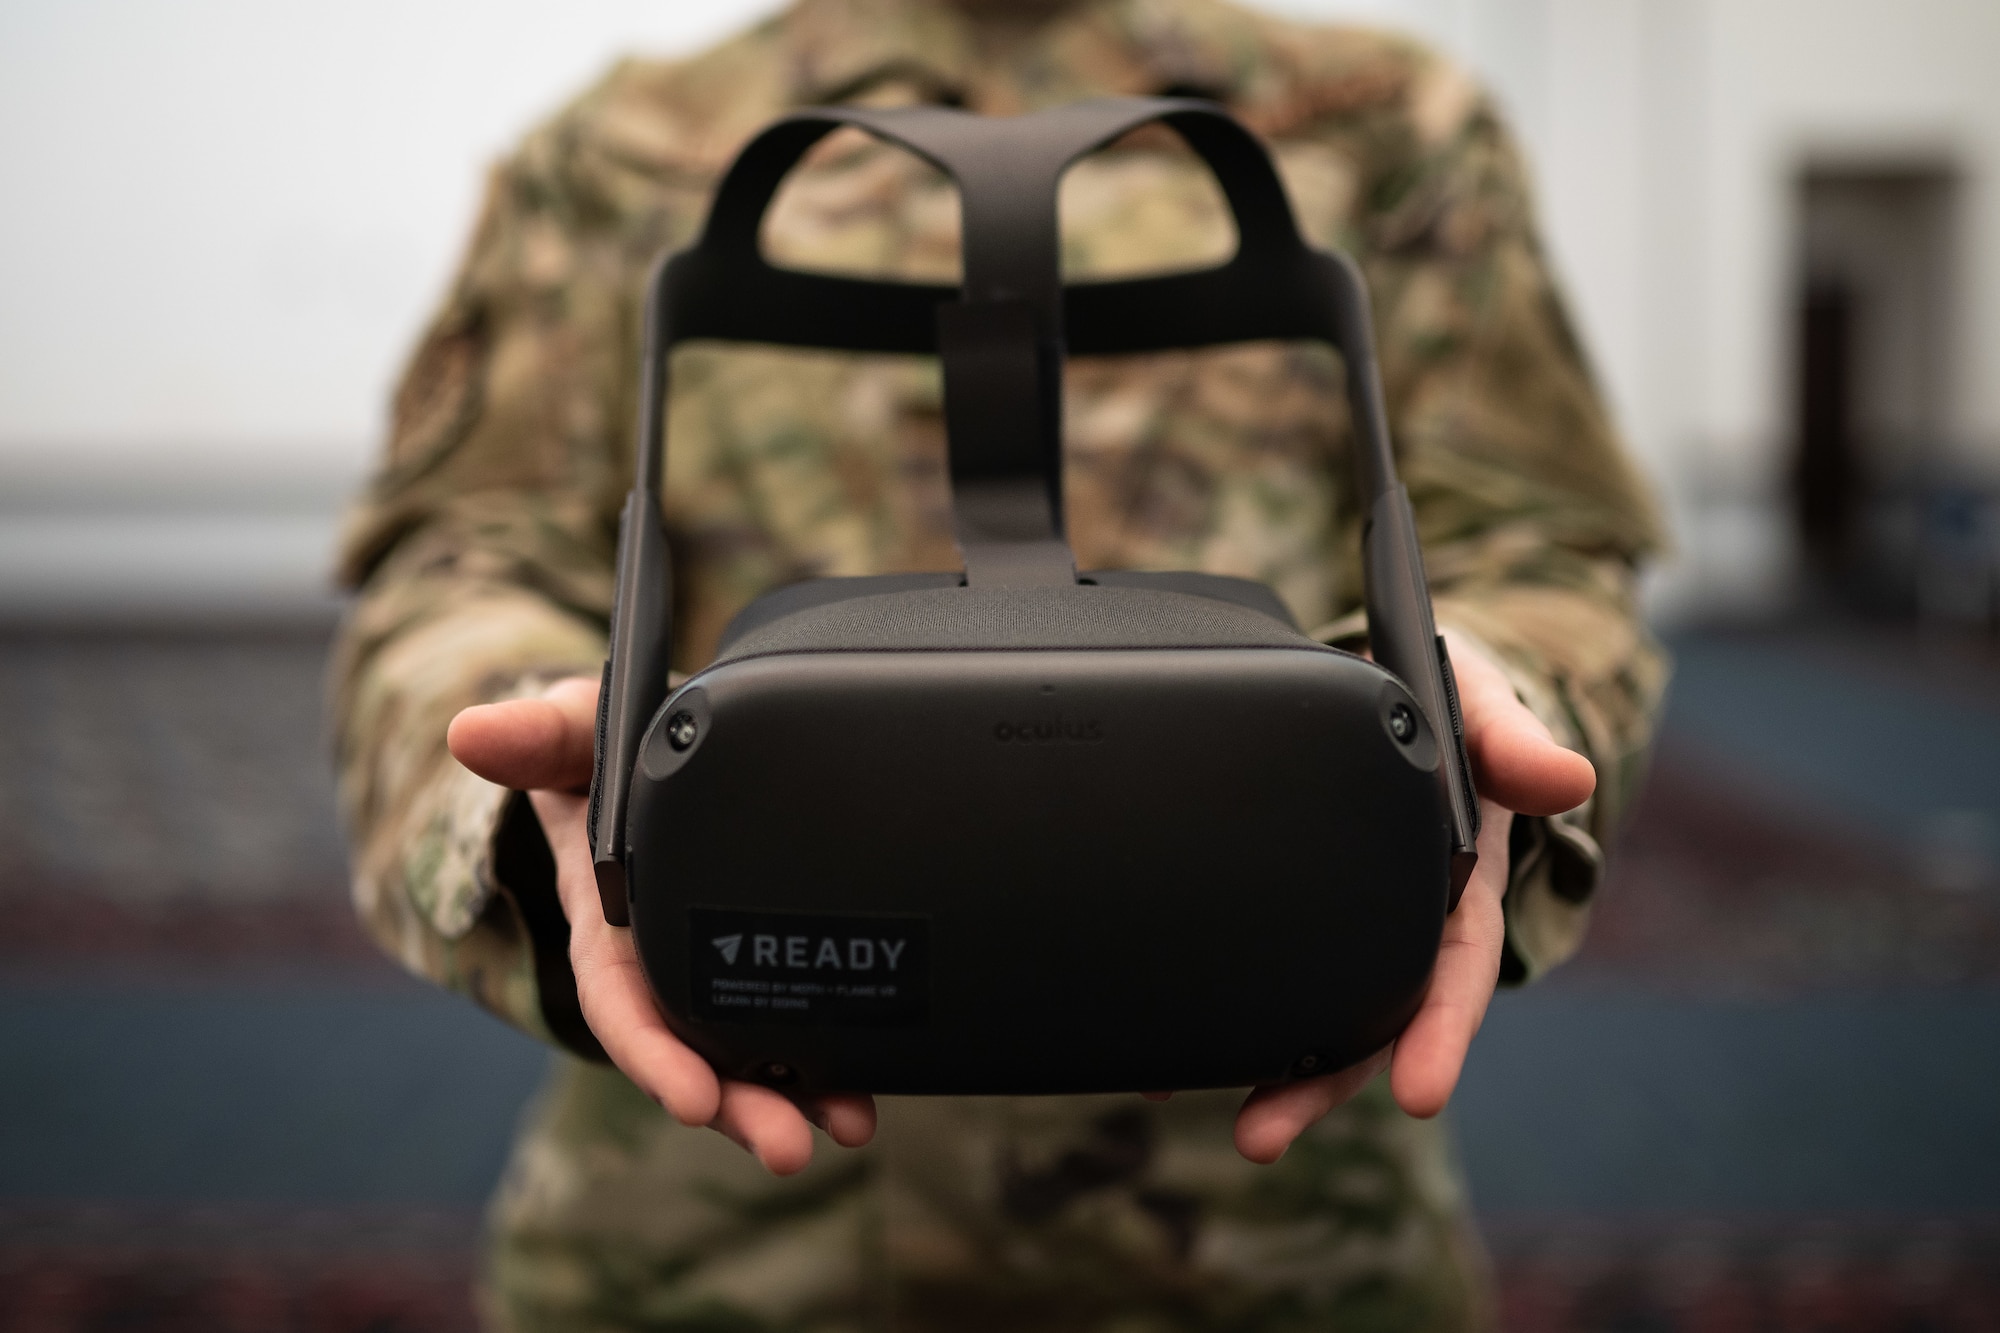 Scott AFB is one of two test bases that will provide feedback on a new suicide prevention training initiative using a virtual reality-based initiative that Air Mobility Command is testing on behalf of the Air Force.